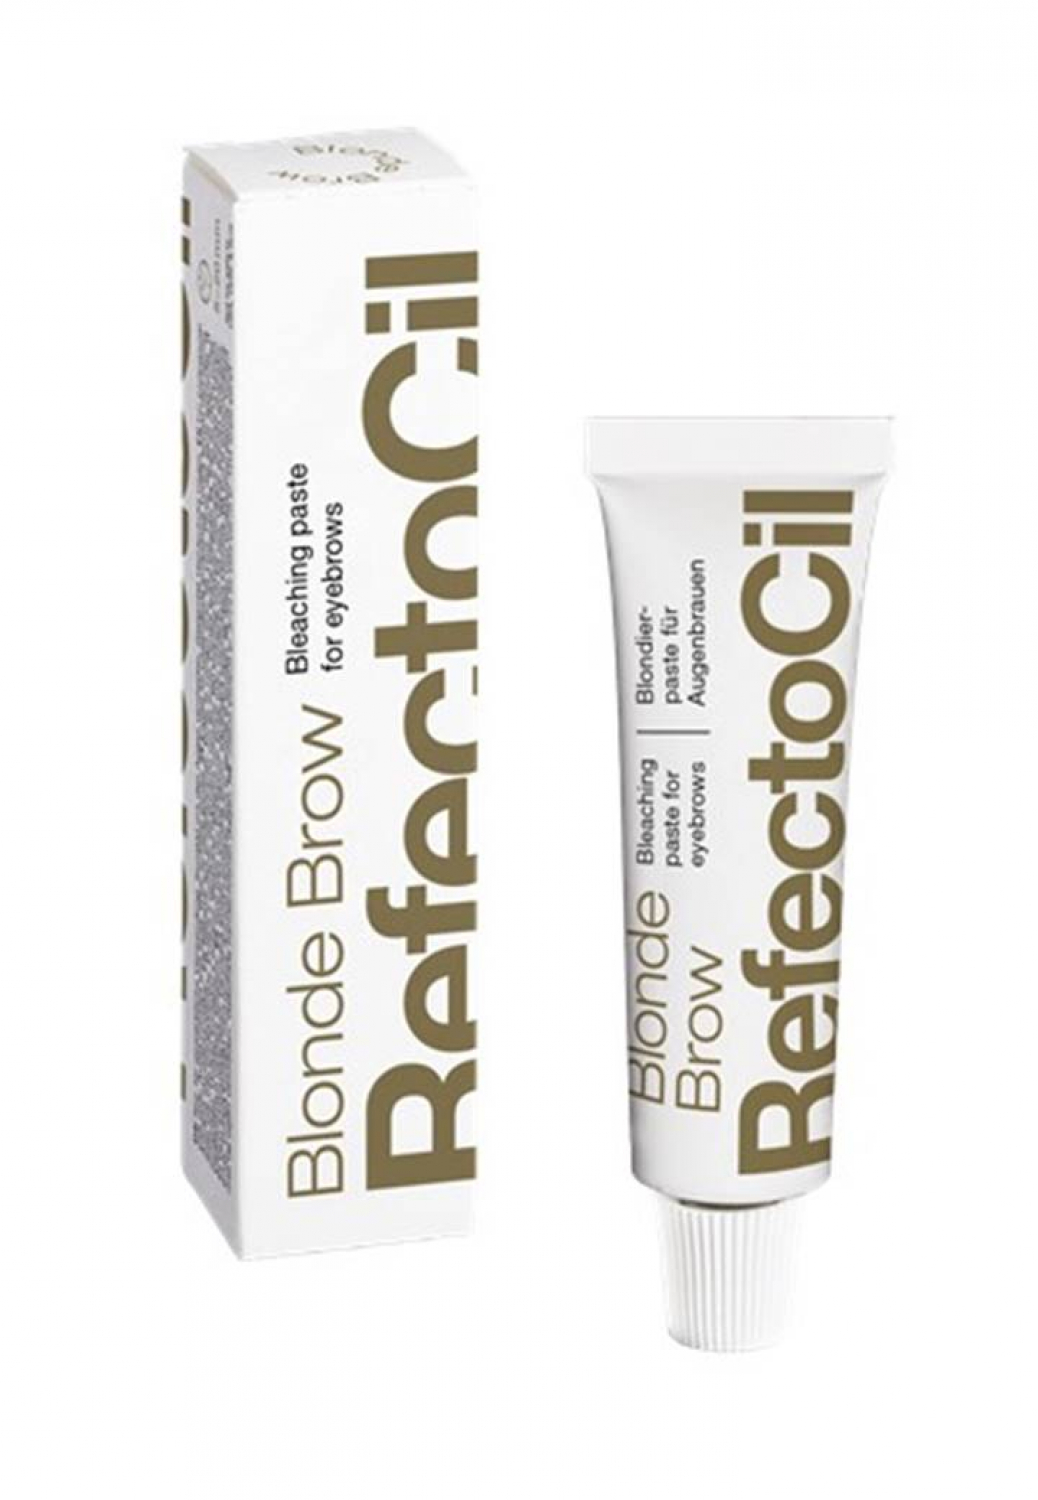 refectocil blond brow